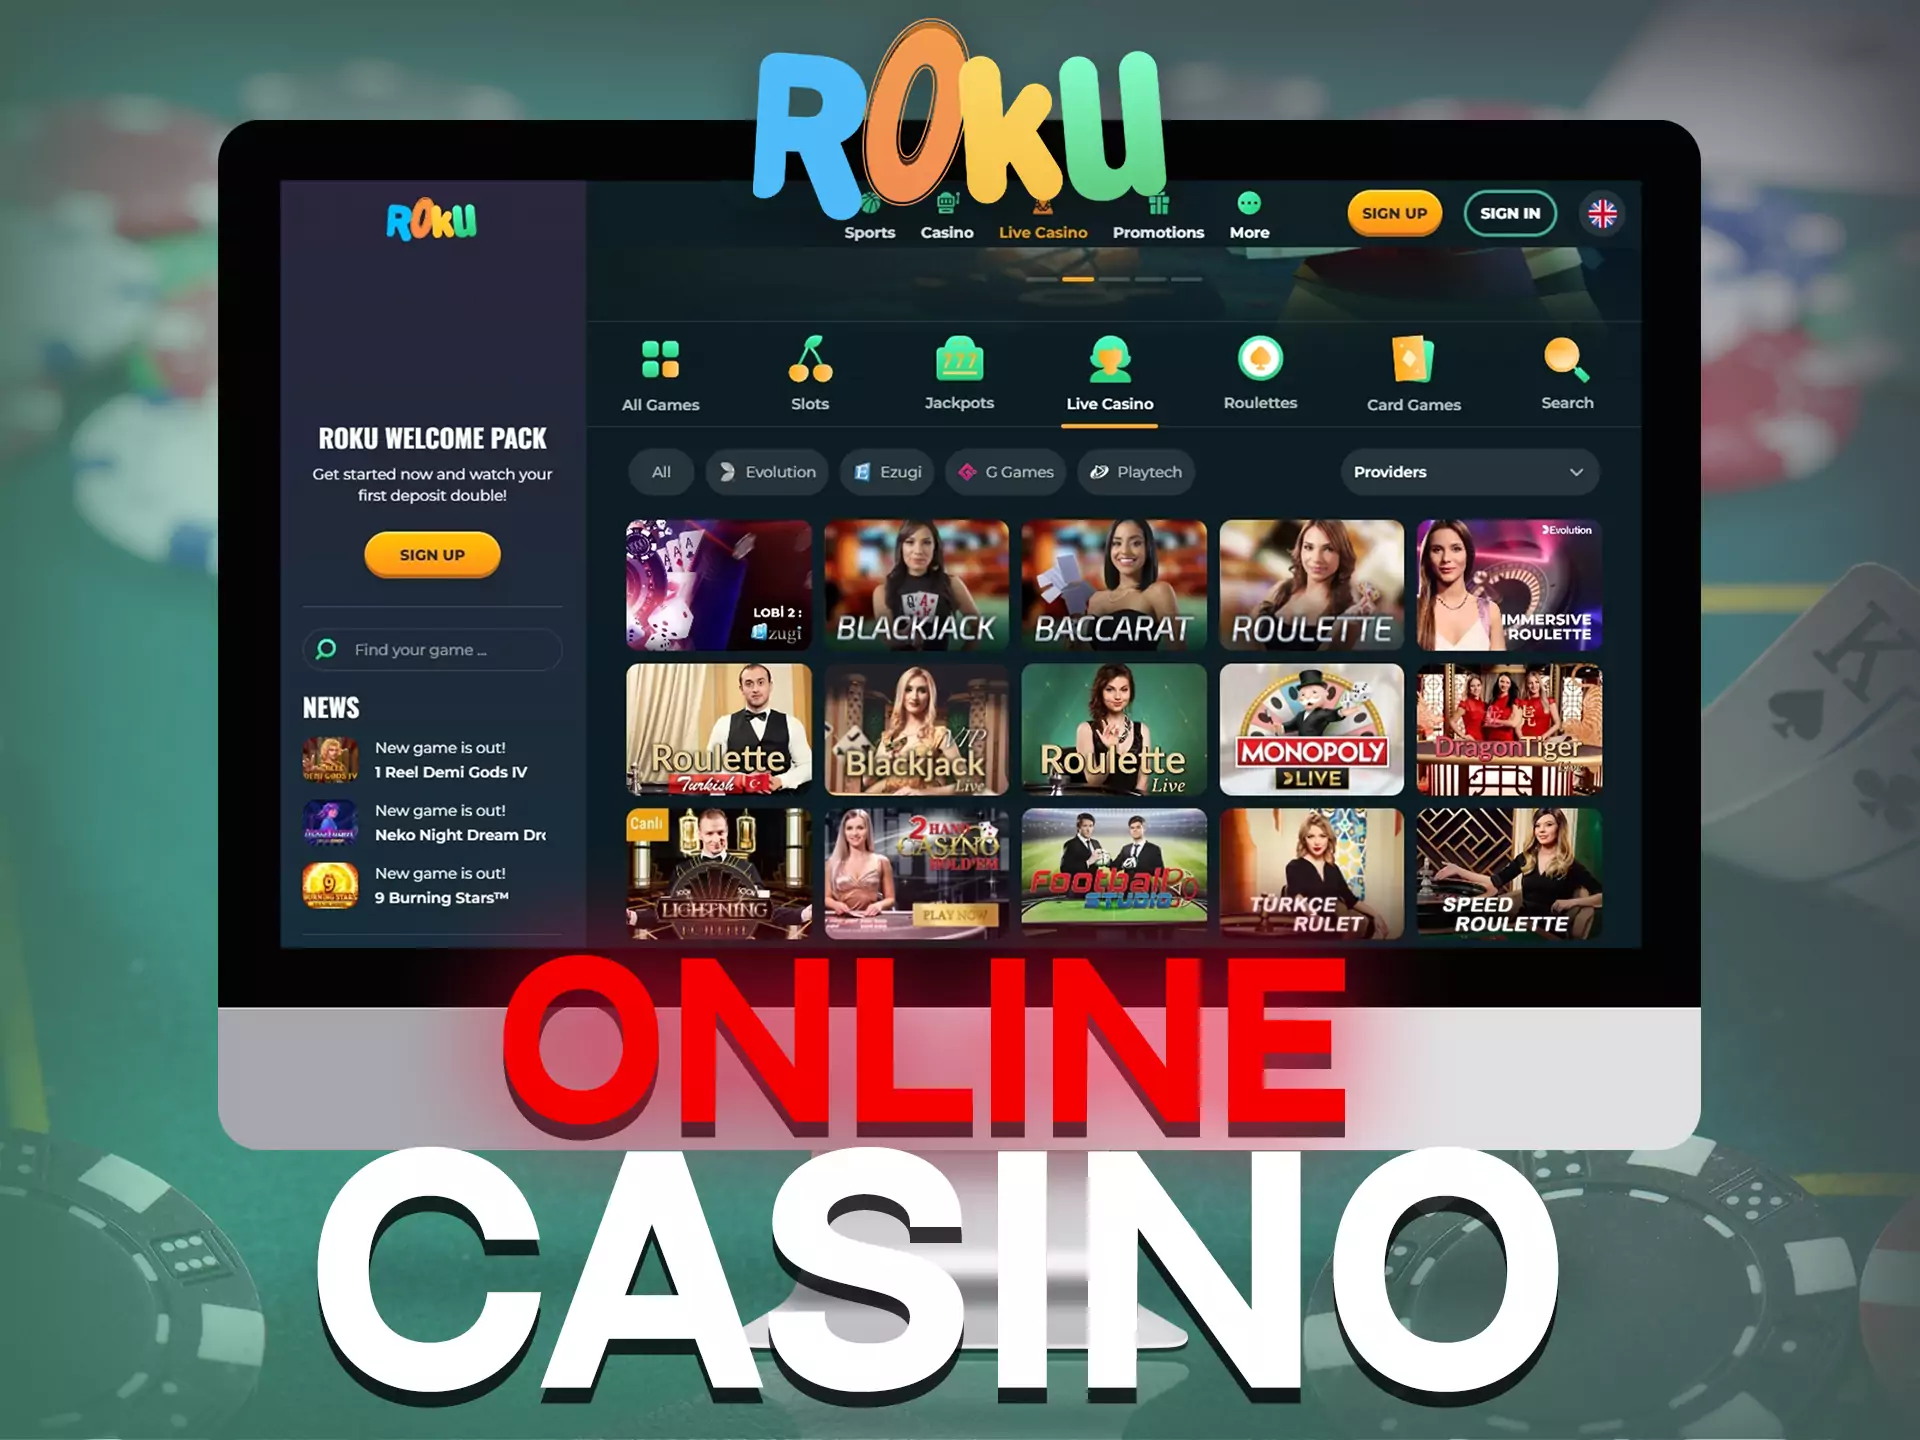 In the Rokubet online casino, you can play slots and traditional table games.